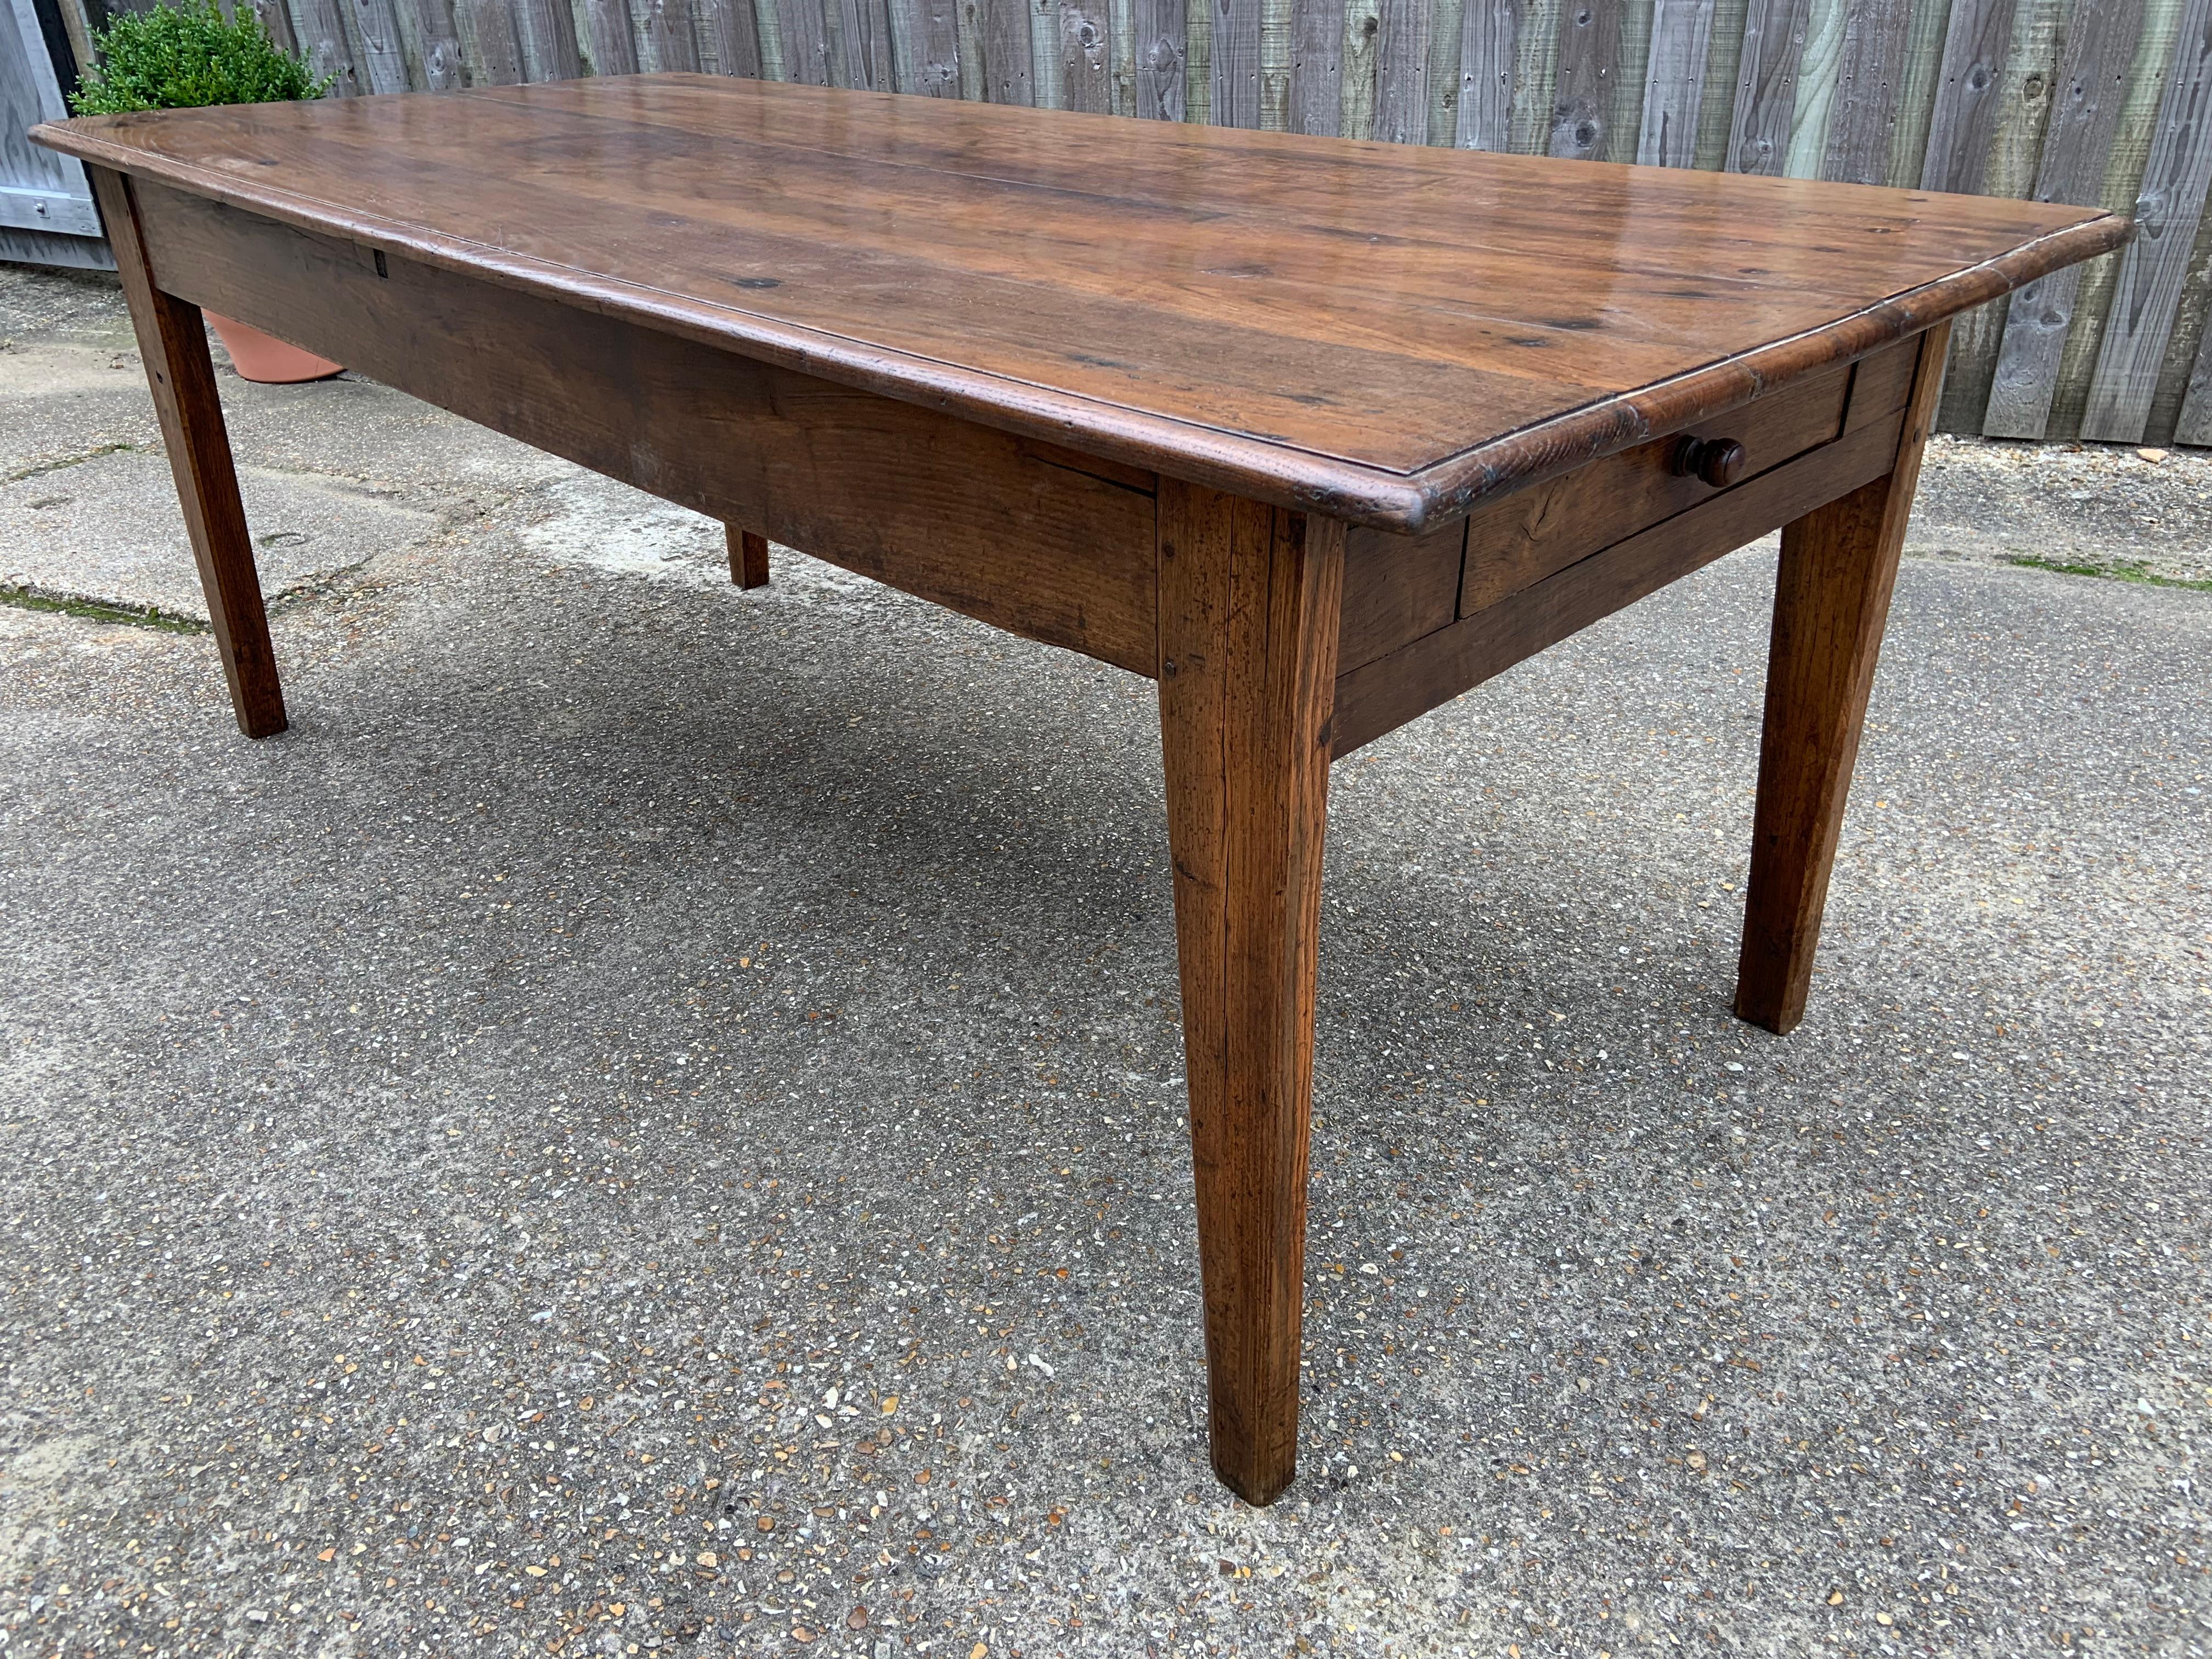 Late 19th Century chestnut farmhouse table with one drawer. Beautiful five plank top with tapered legs and end drawer.

 